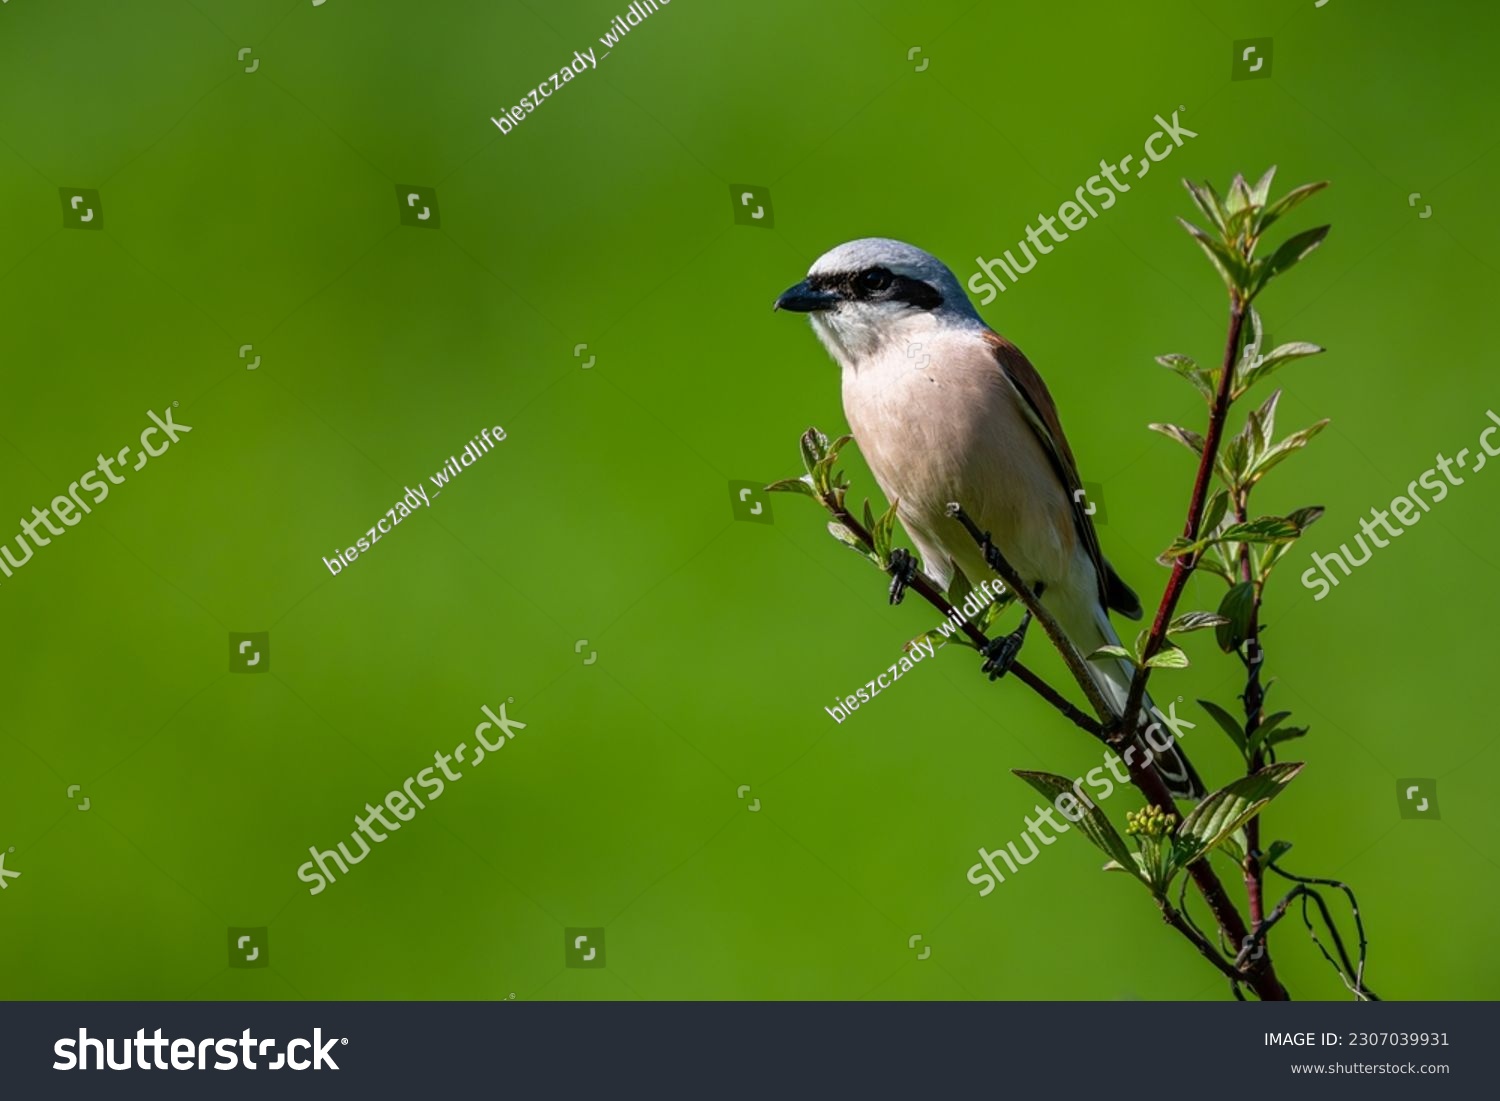 Red-backed shrike, Lanius collurio. A bird on a branch in a green background. #2307039931